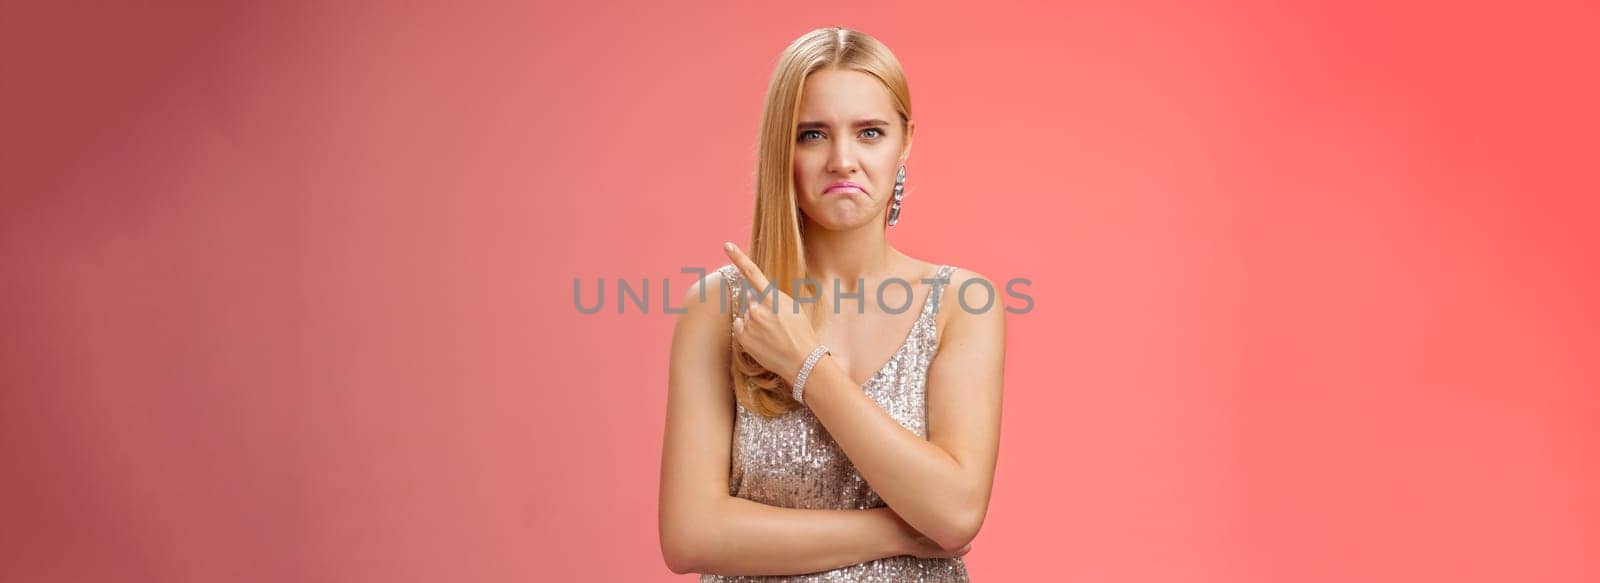 Lifestyle. Jealous displeased angry young revengeful blond ex-girlfriend in luxurious silver shiny dress frowning pouting pointing upper right corner displeased pissed standing fed up upset red background.